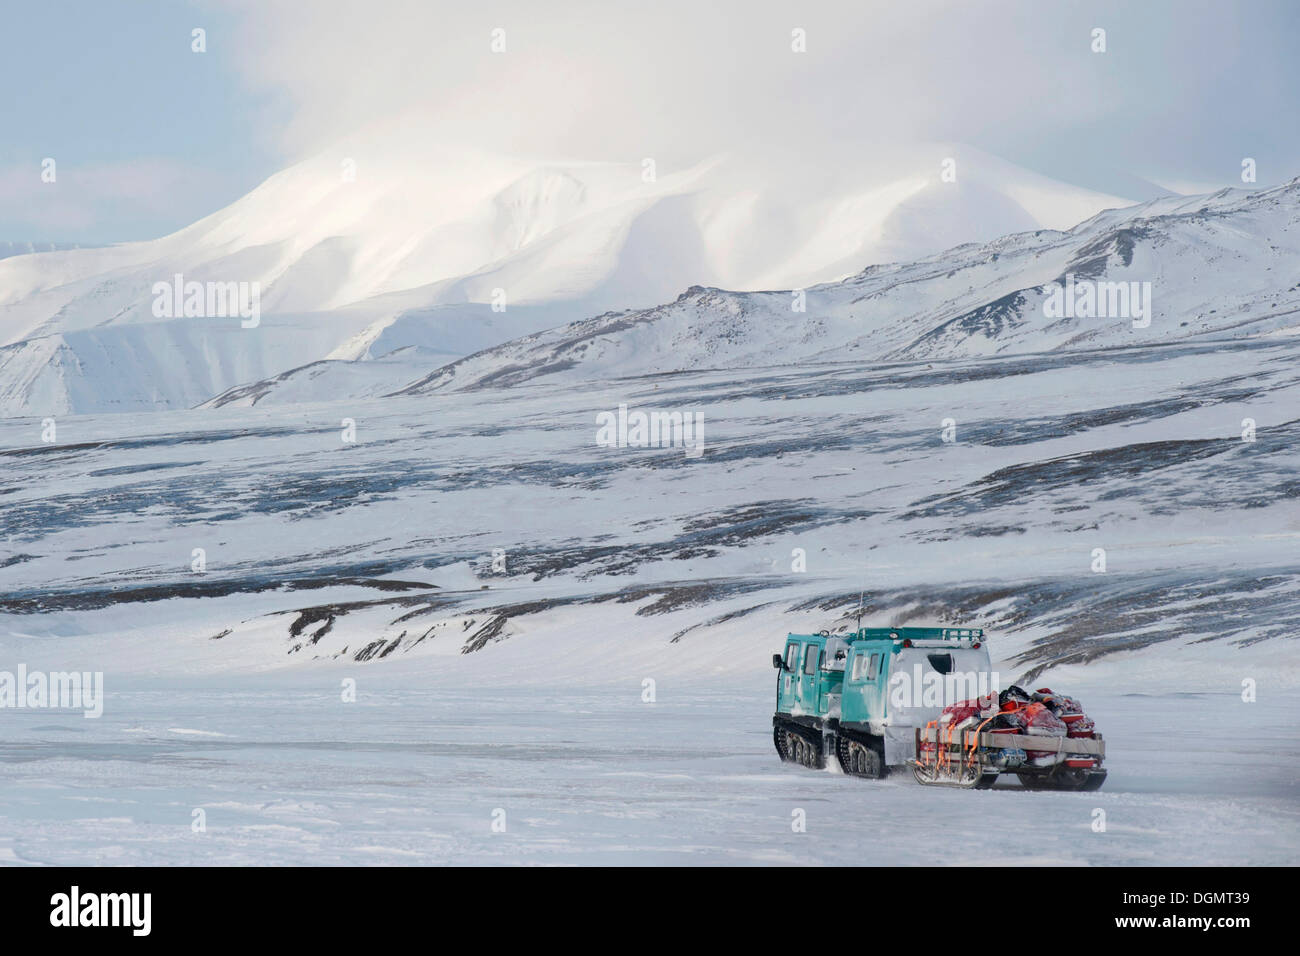 Beltwagon, tracked vehicle, transporting passengers and luggage on a snowmobile track, Adventdalen, Spitsbergen, Svalbard Stock Photo